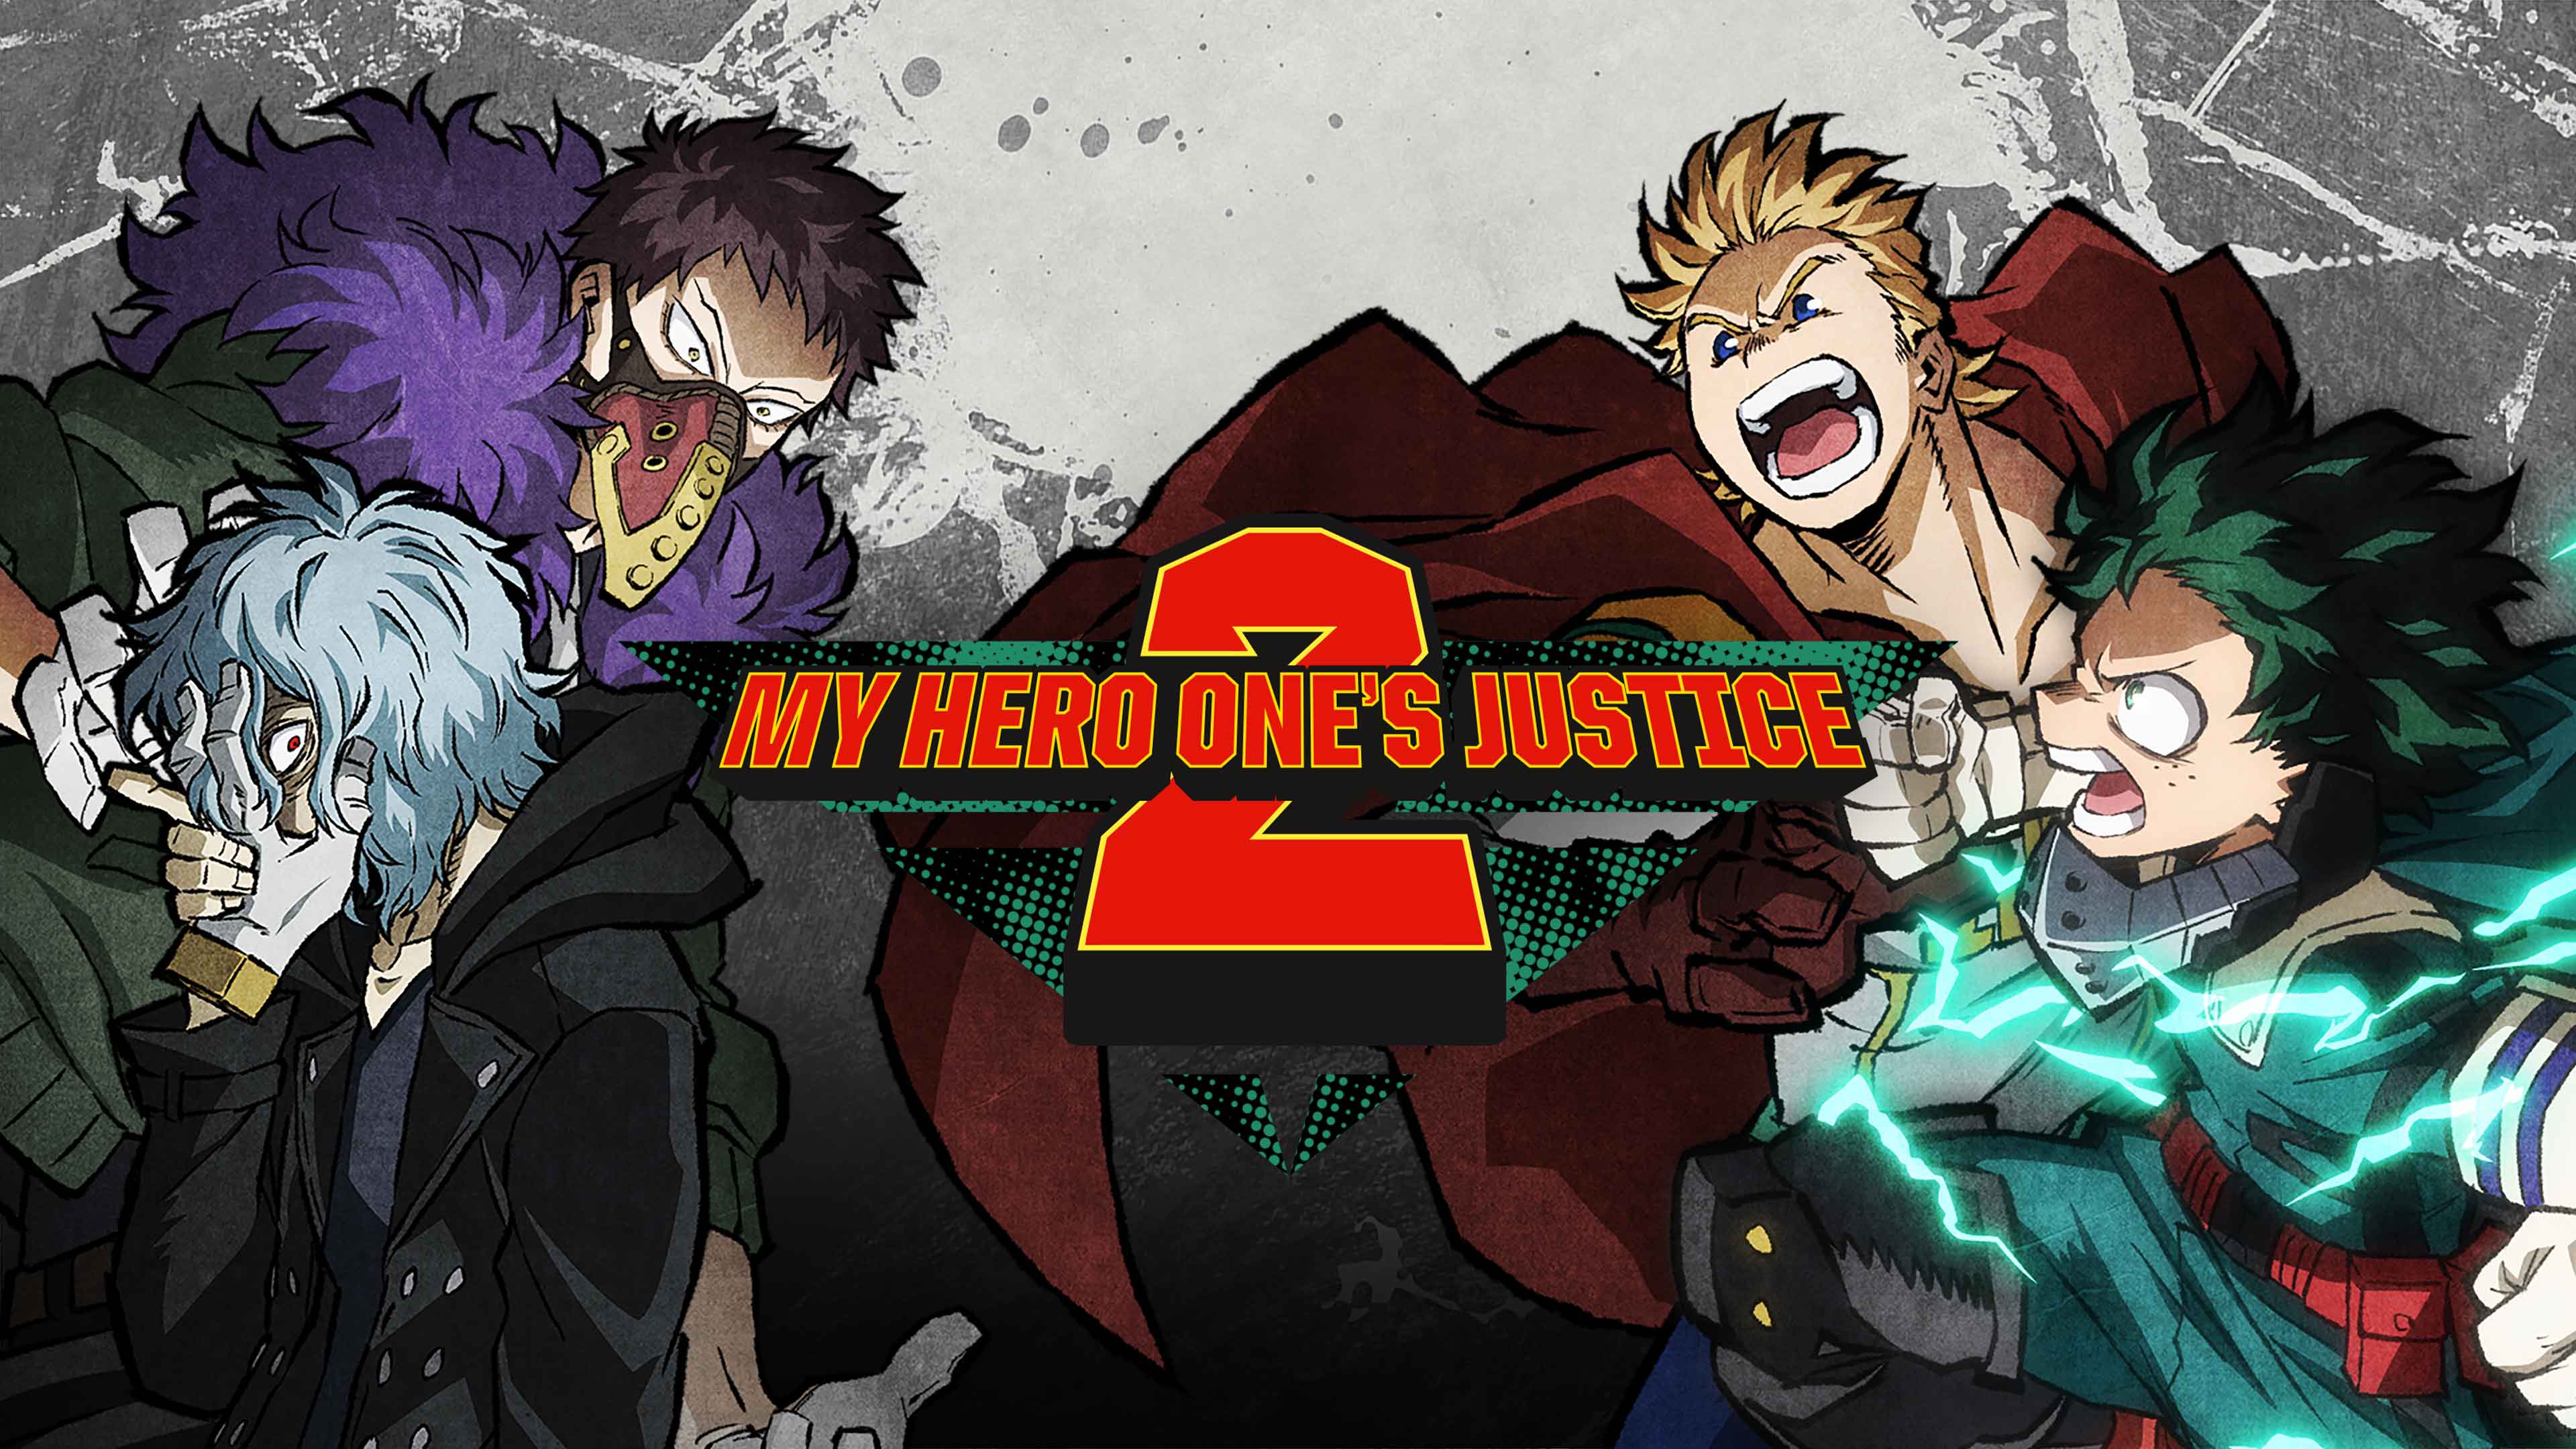 MY HERO ONE'S JUSTICE 2 (Korean, Traditional Chinese)